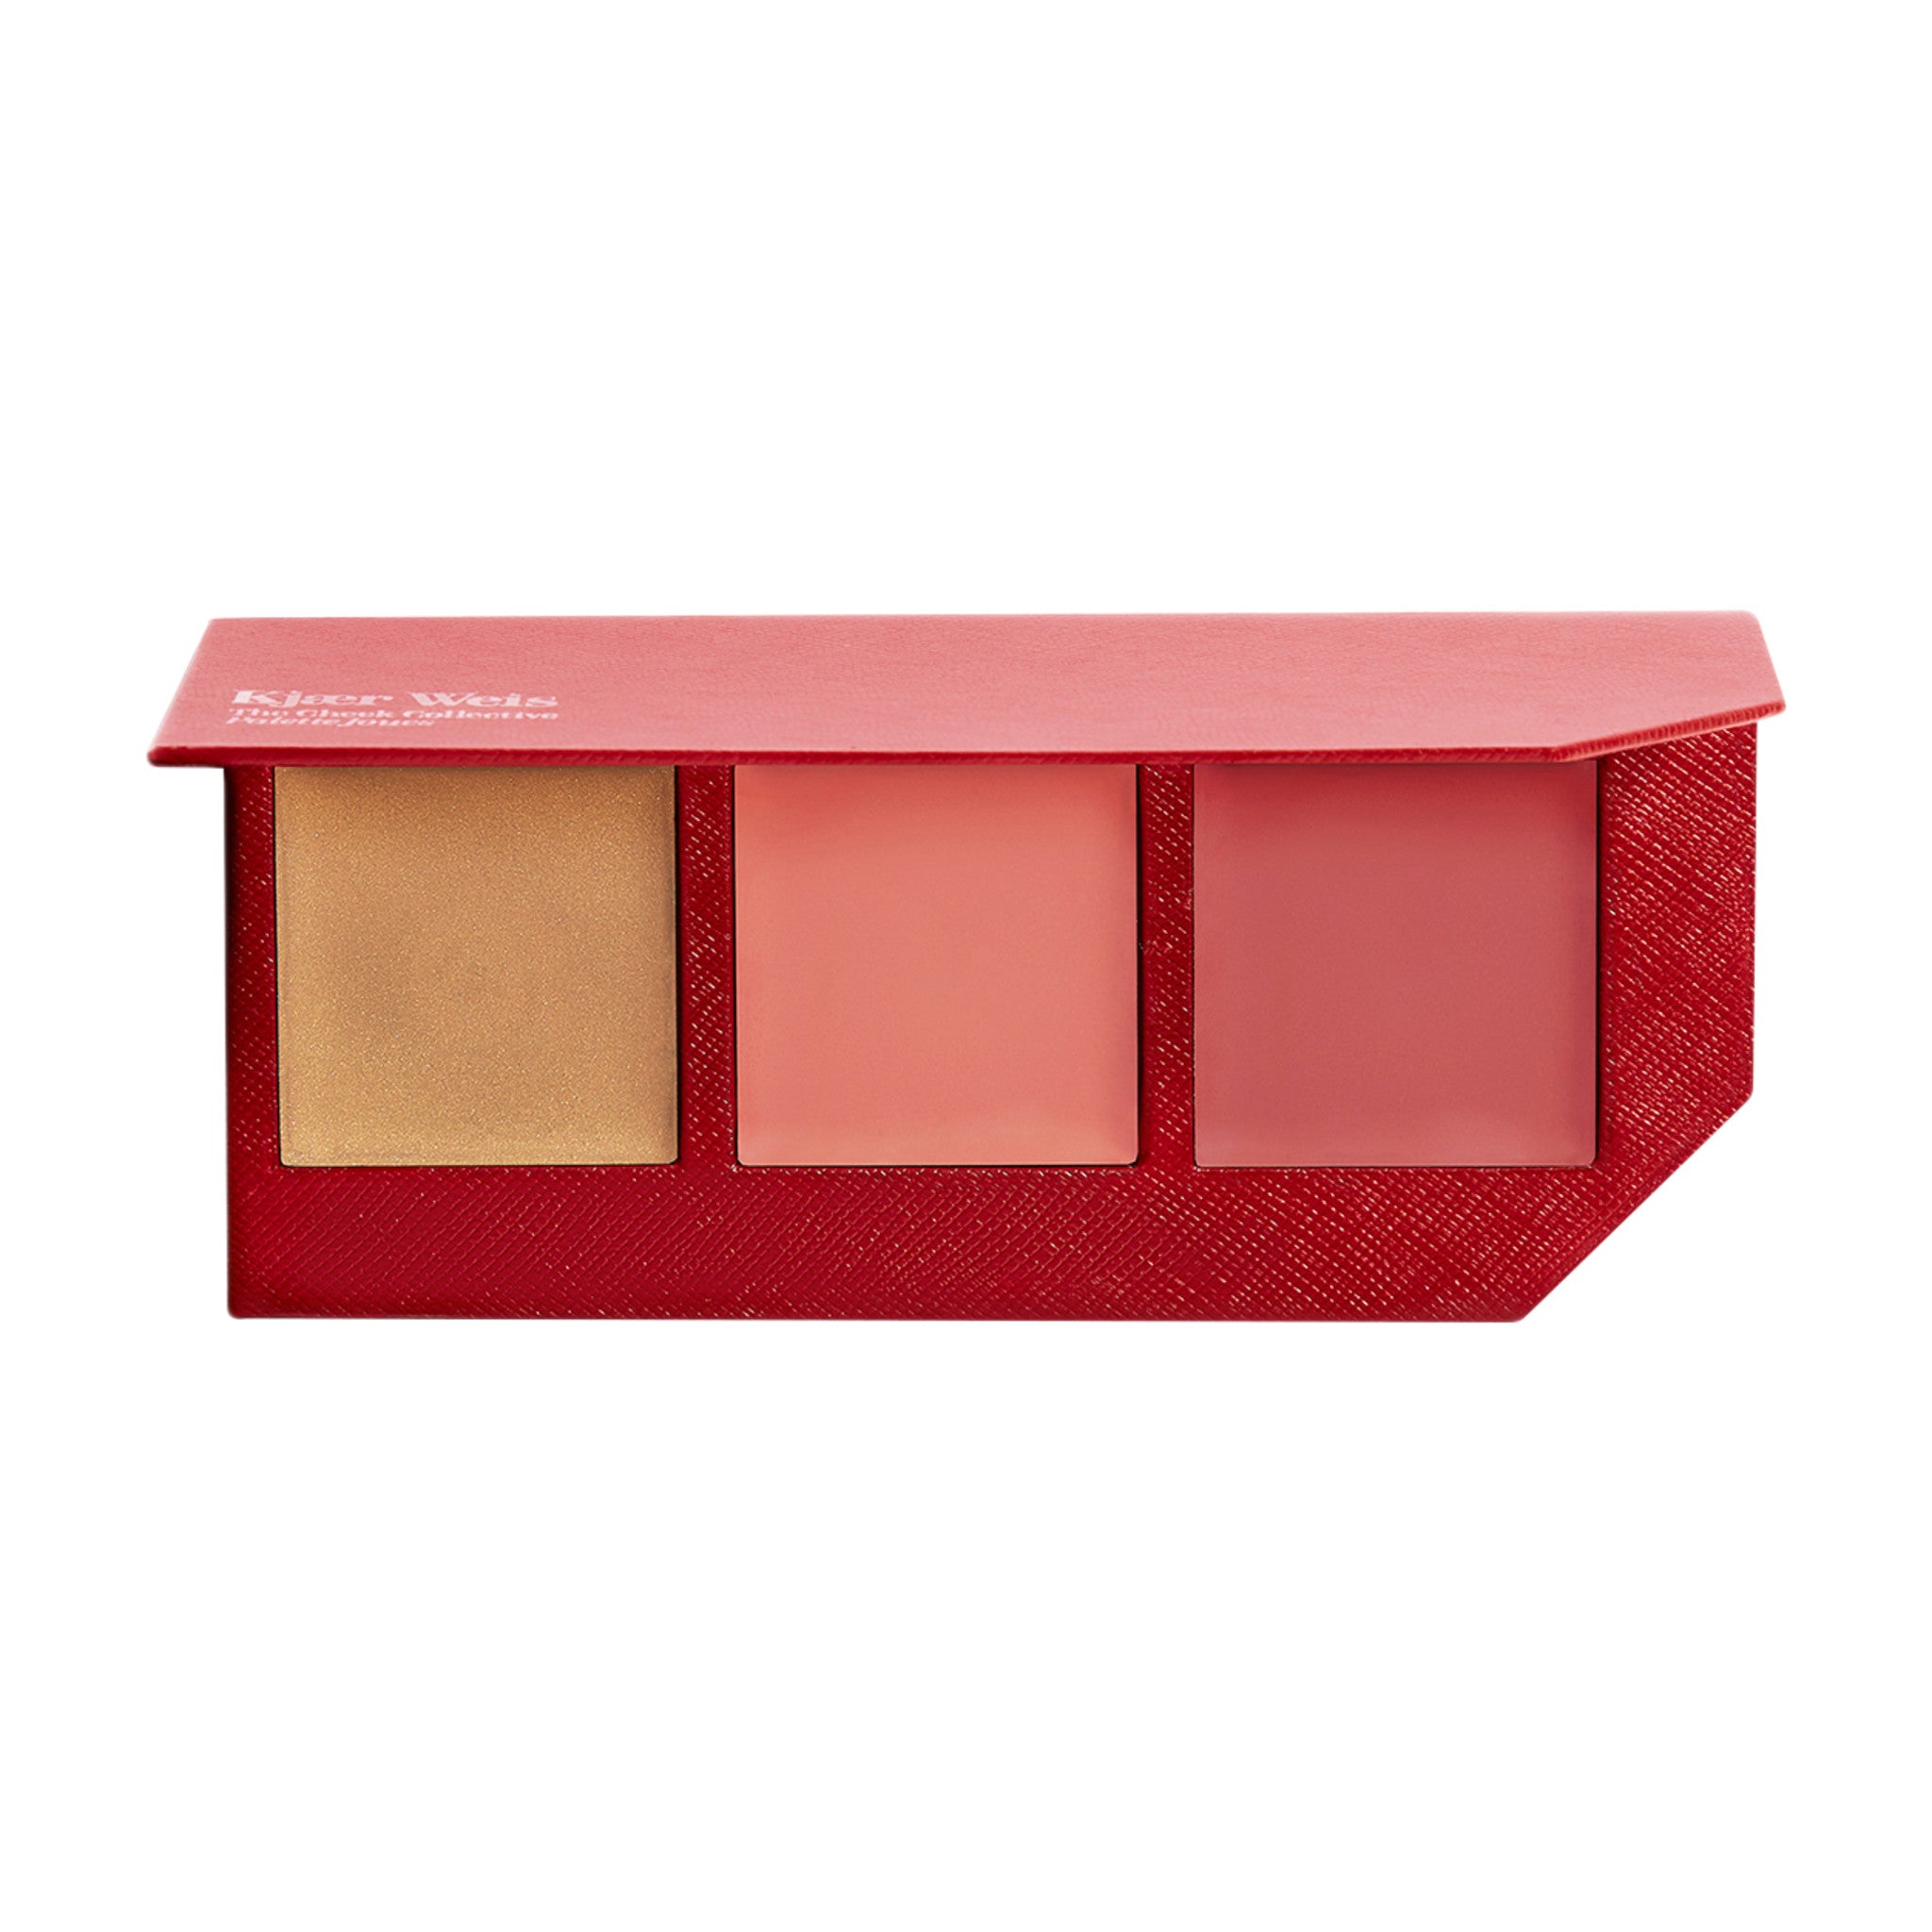 Limited edition Kjaer Weis The Cheek Collective (Limited Edition) Color/Shade variant: Sun Touched main image. This product is in the color multi